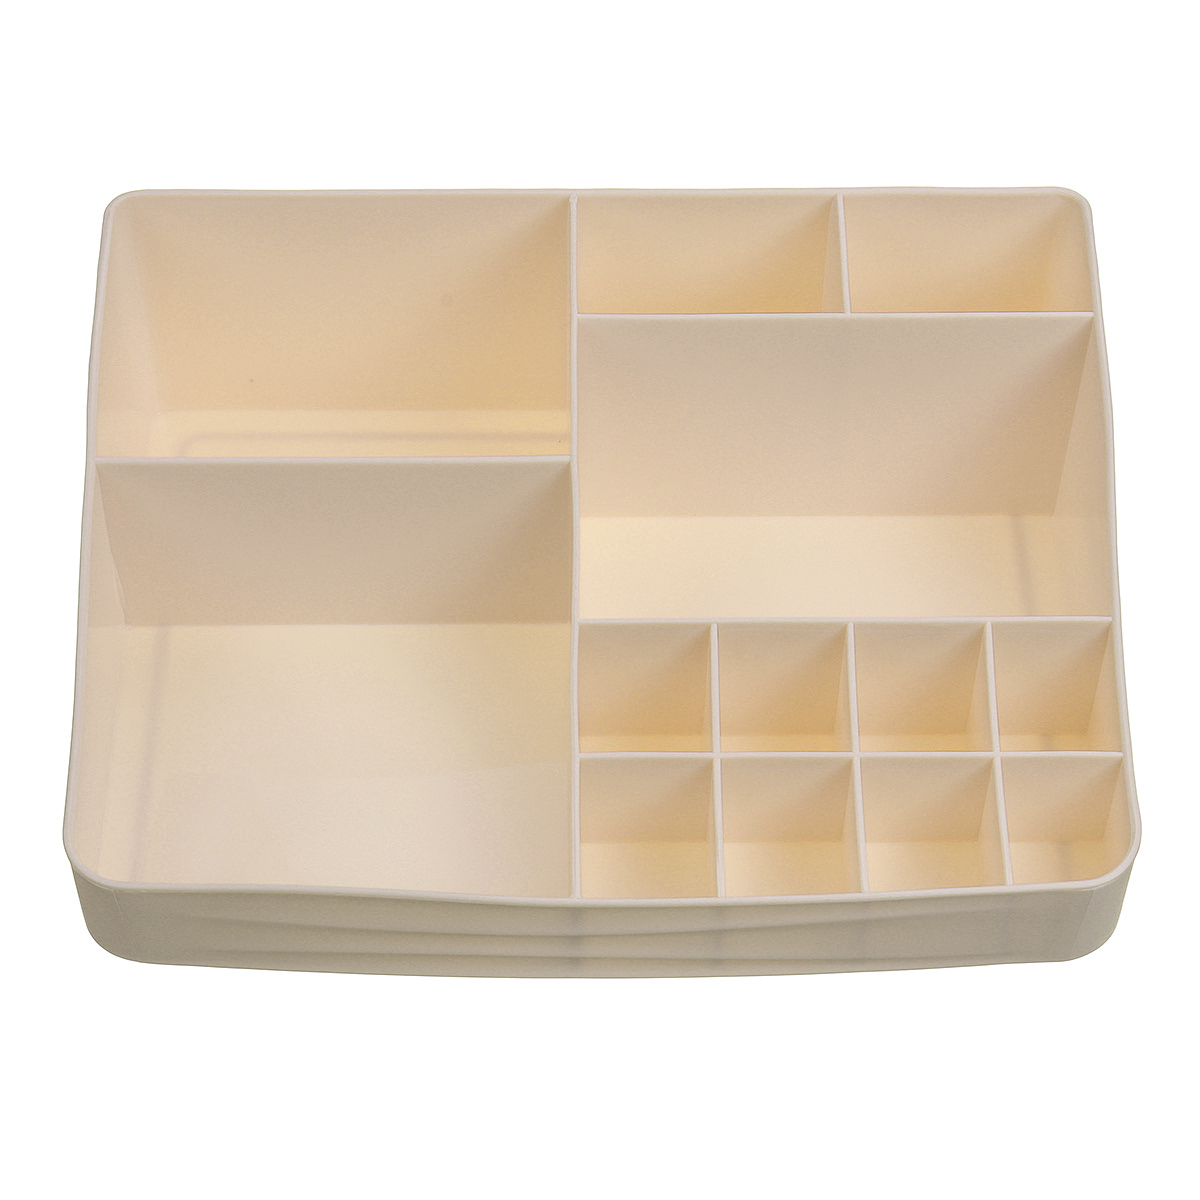 Find Women Cosmetic Storage Box Jewelry Makeup Organizer Case Perfume Display Holder for Sale on Gipsybee.com with cryptocurrencies